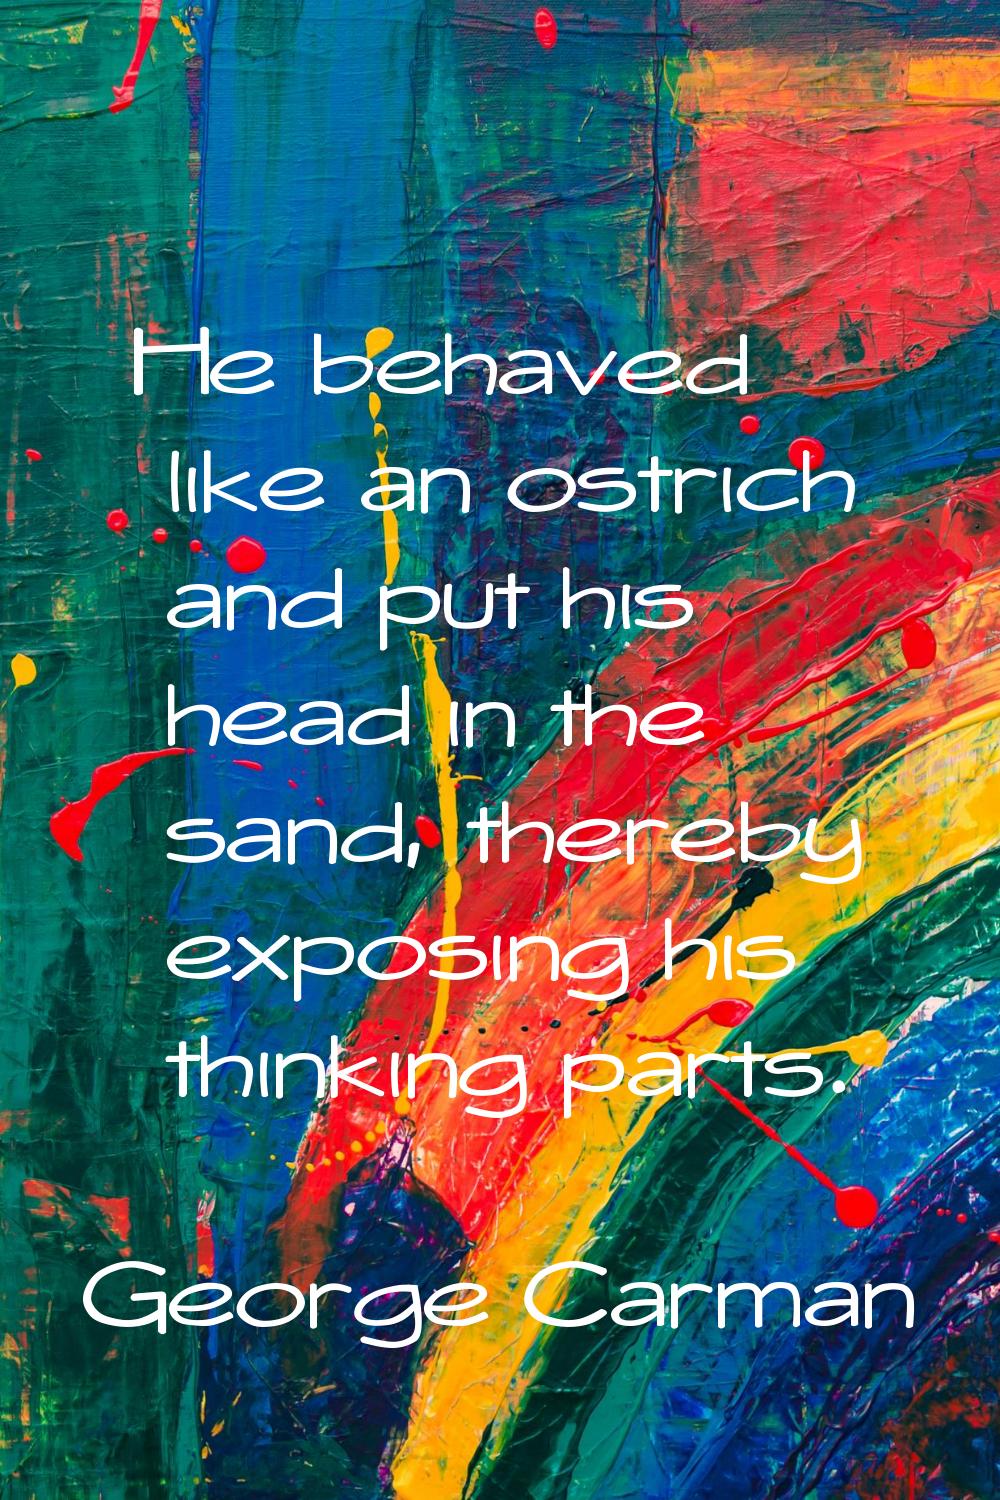 He behaved like an ostrich and put his head in the sand, thereby exposing his thinking parts.